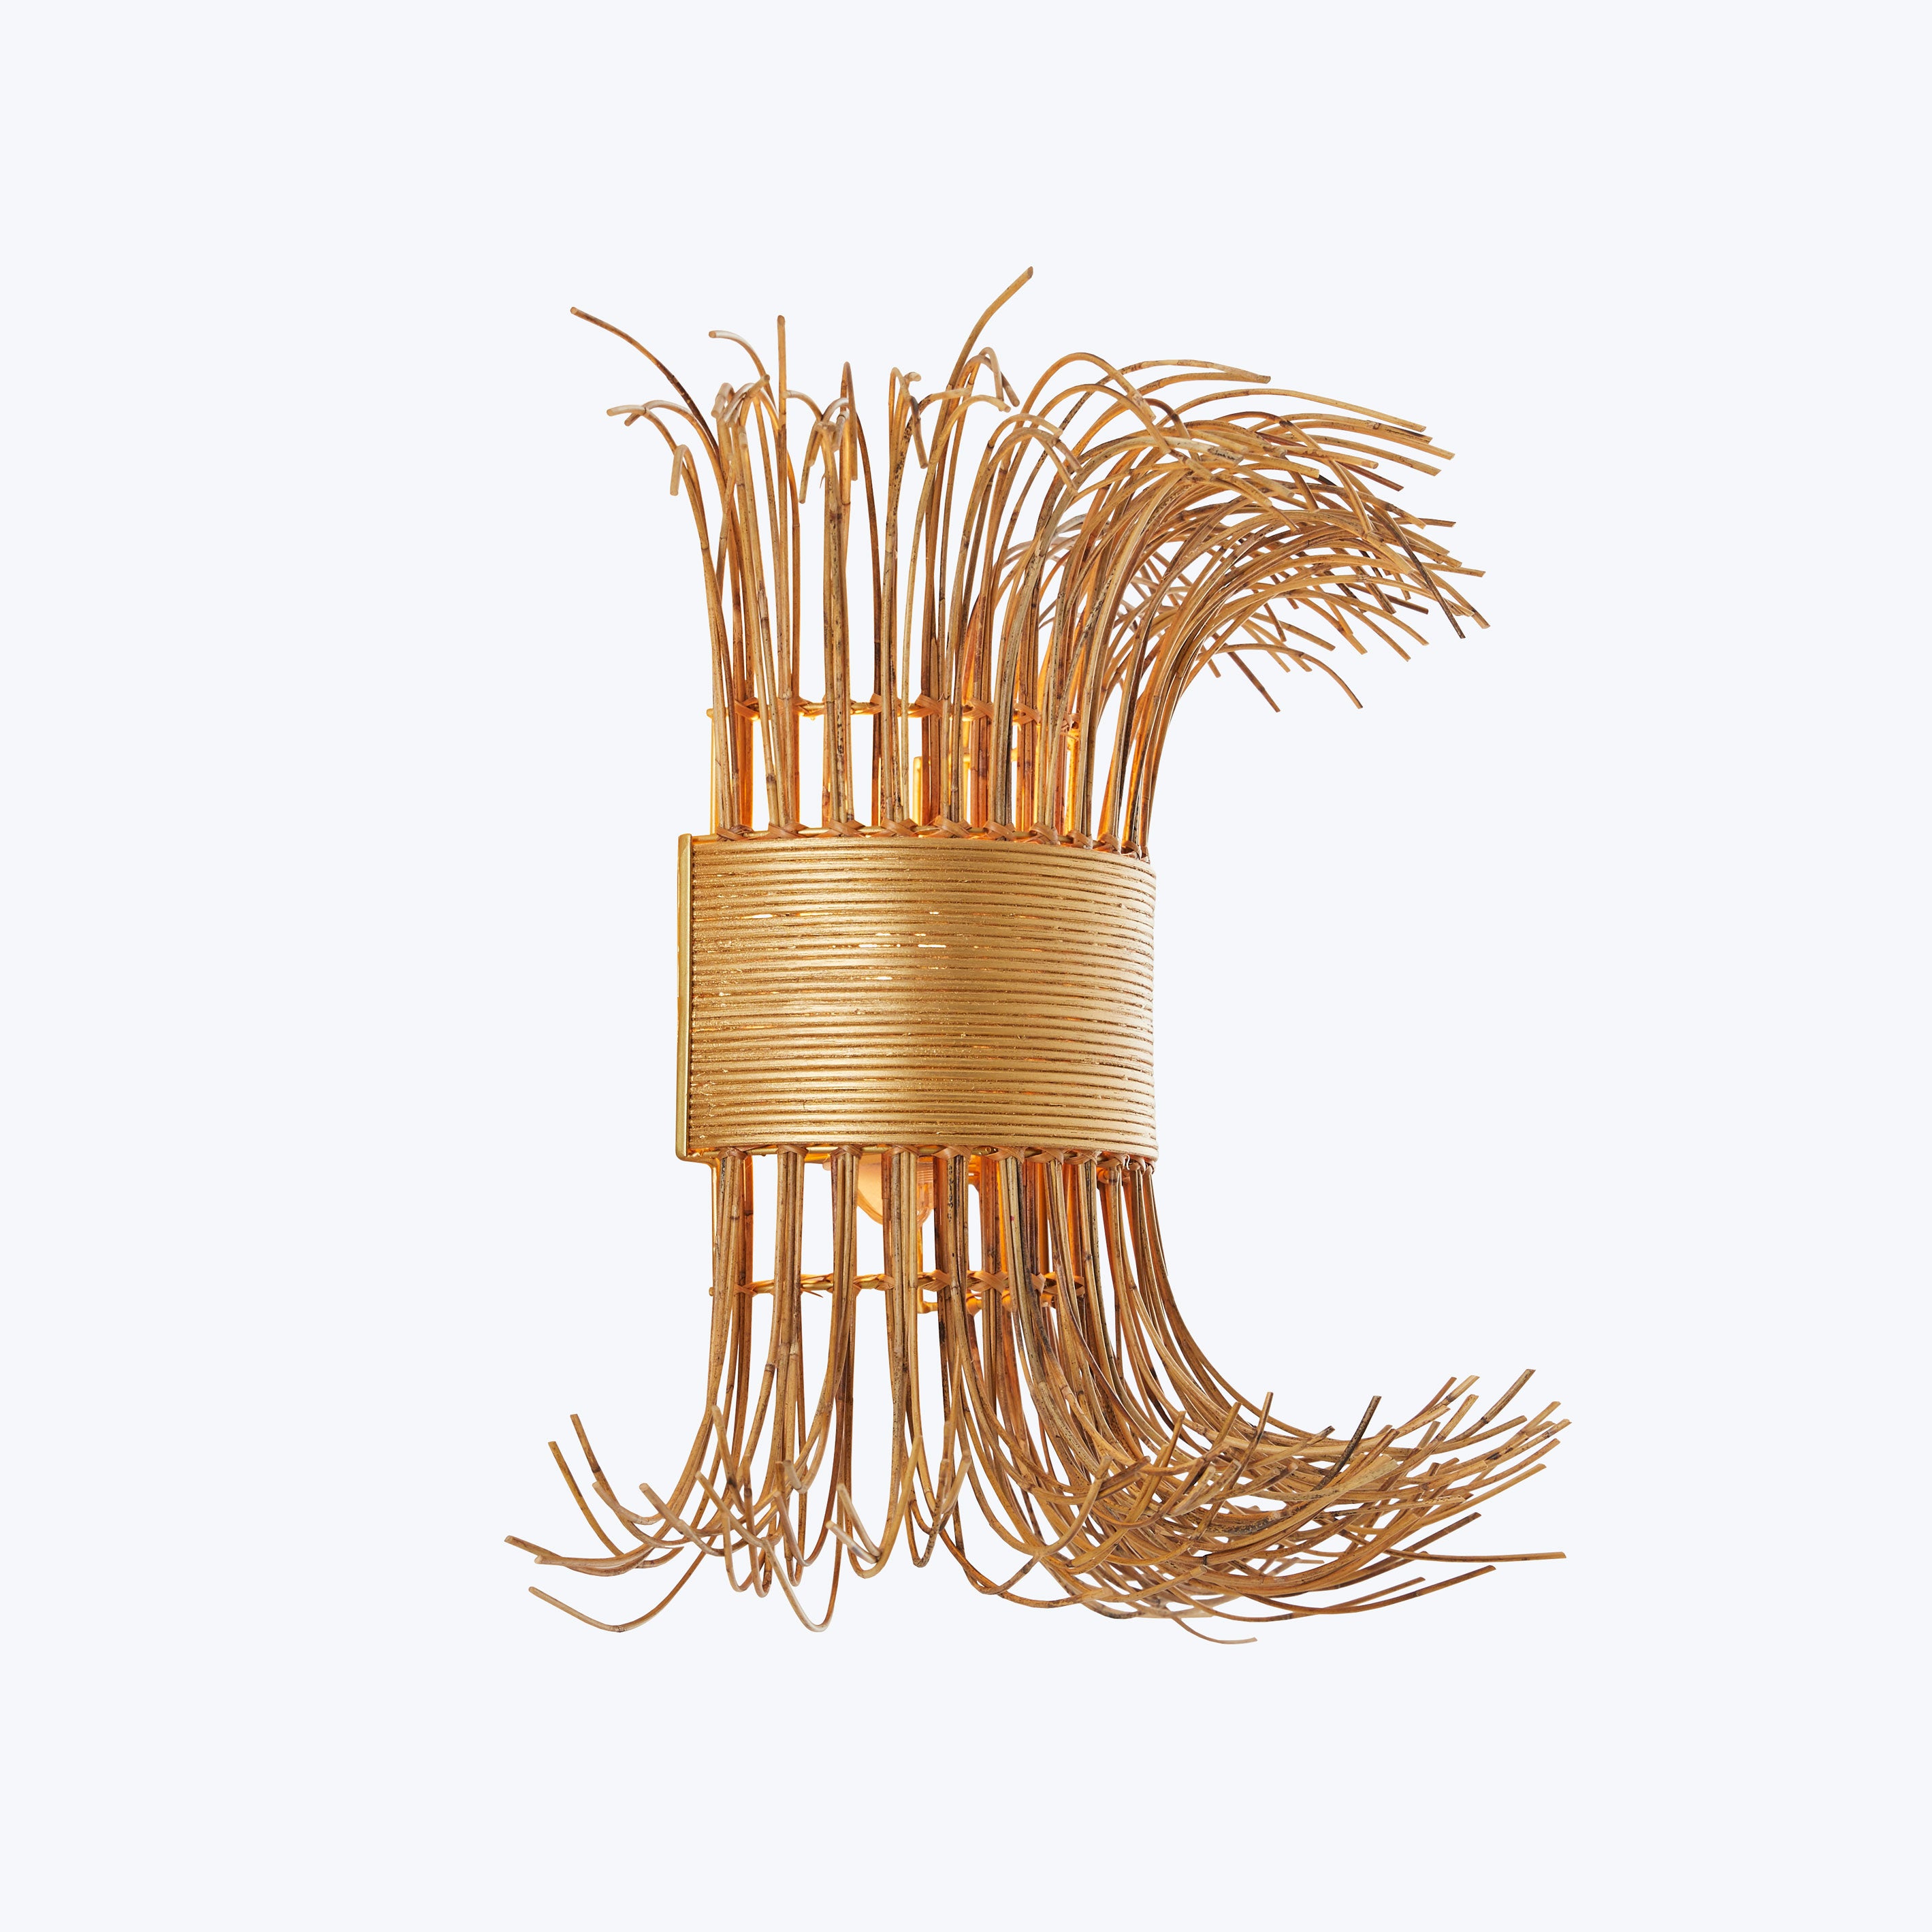 Golden textured sculpture with symmetrical chaos surrounded by bending rods.